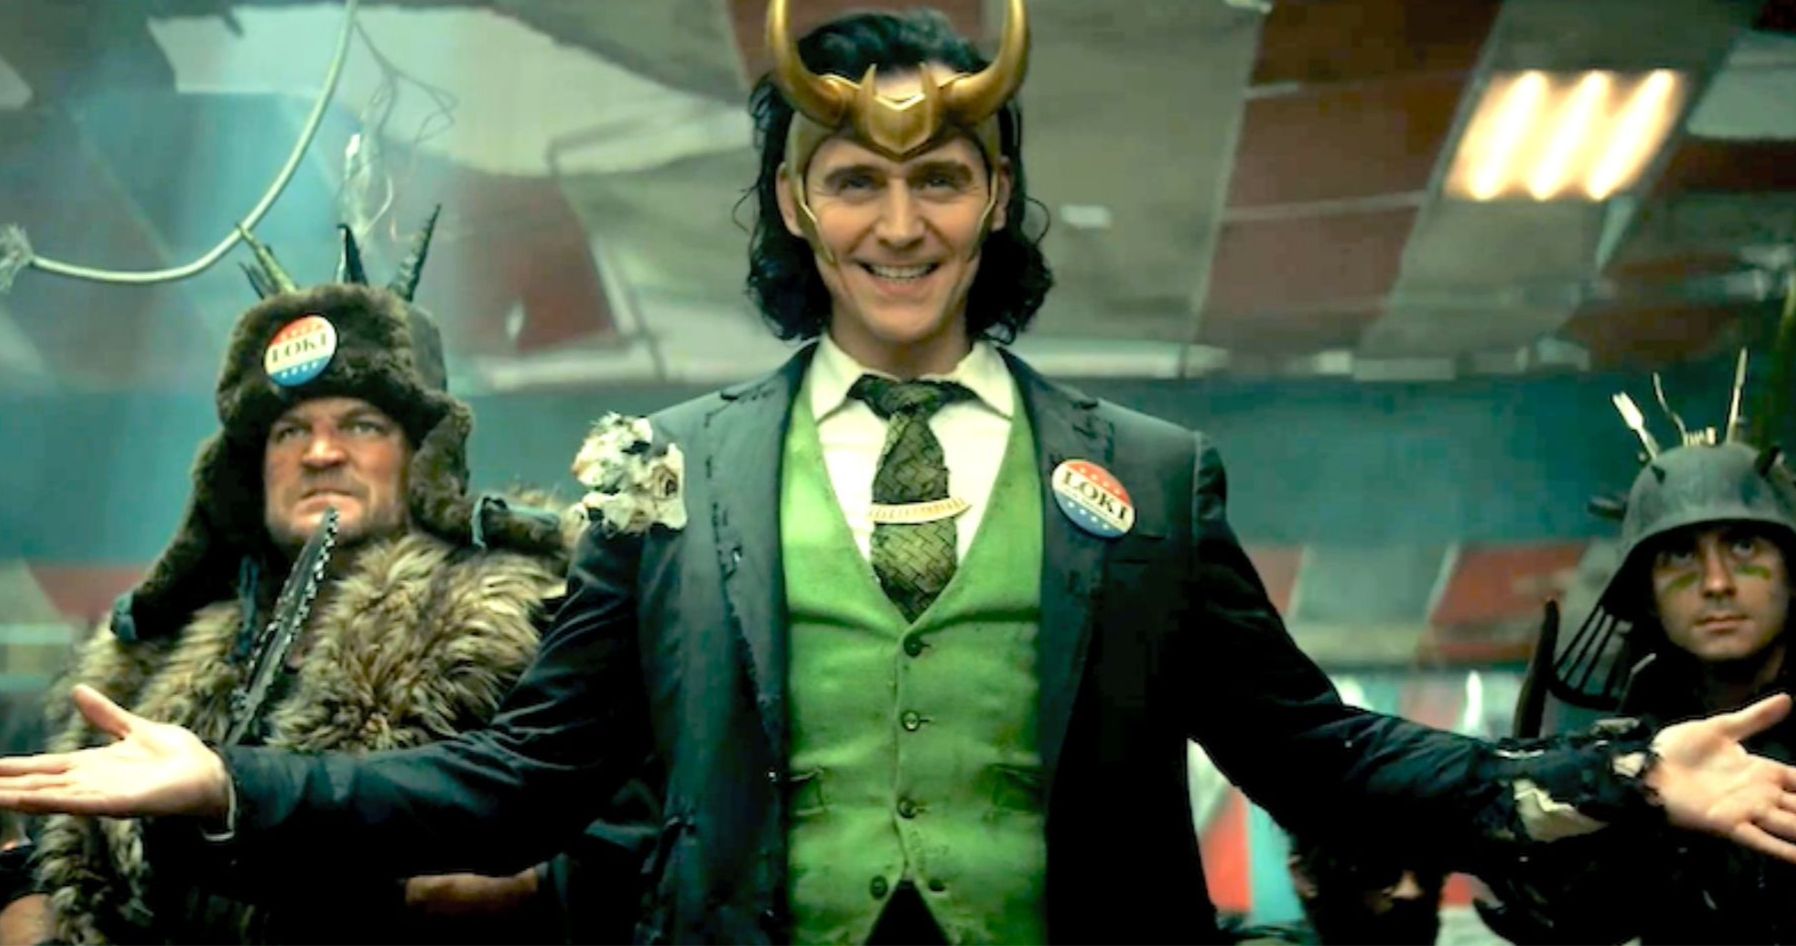 Loki First Reactions Arrive, Sounds Like Marvel and Disney+ Have Another Smash Hit